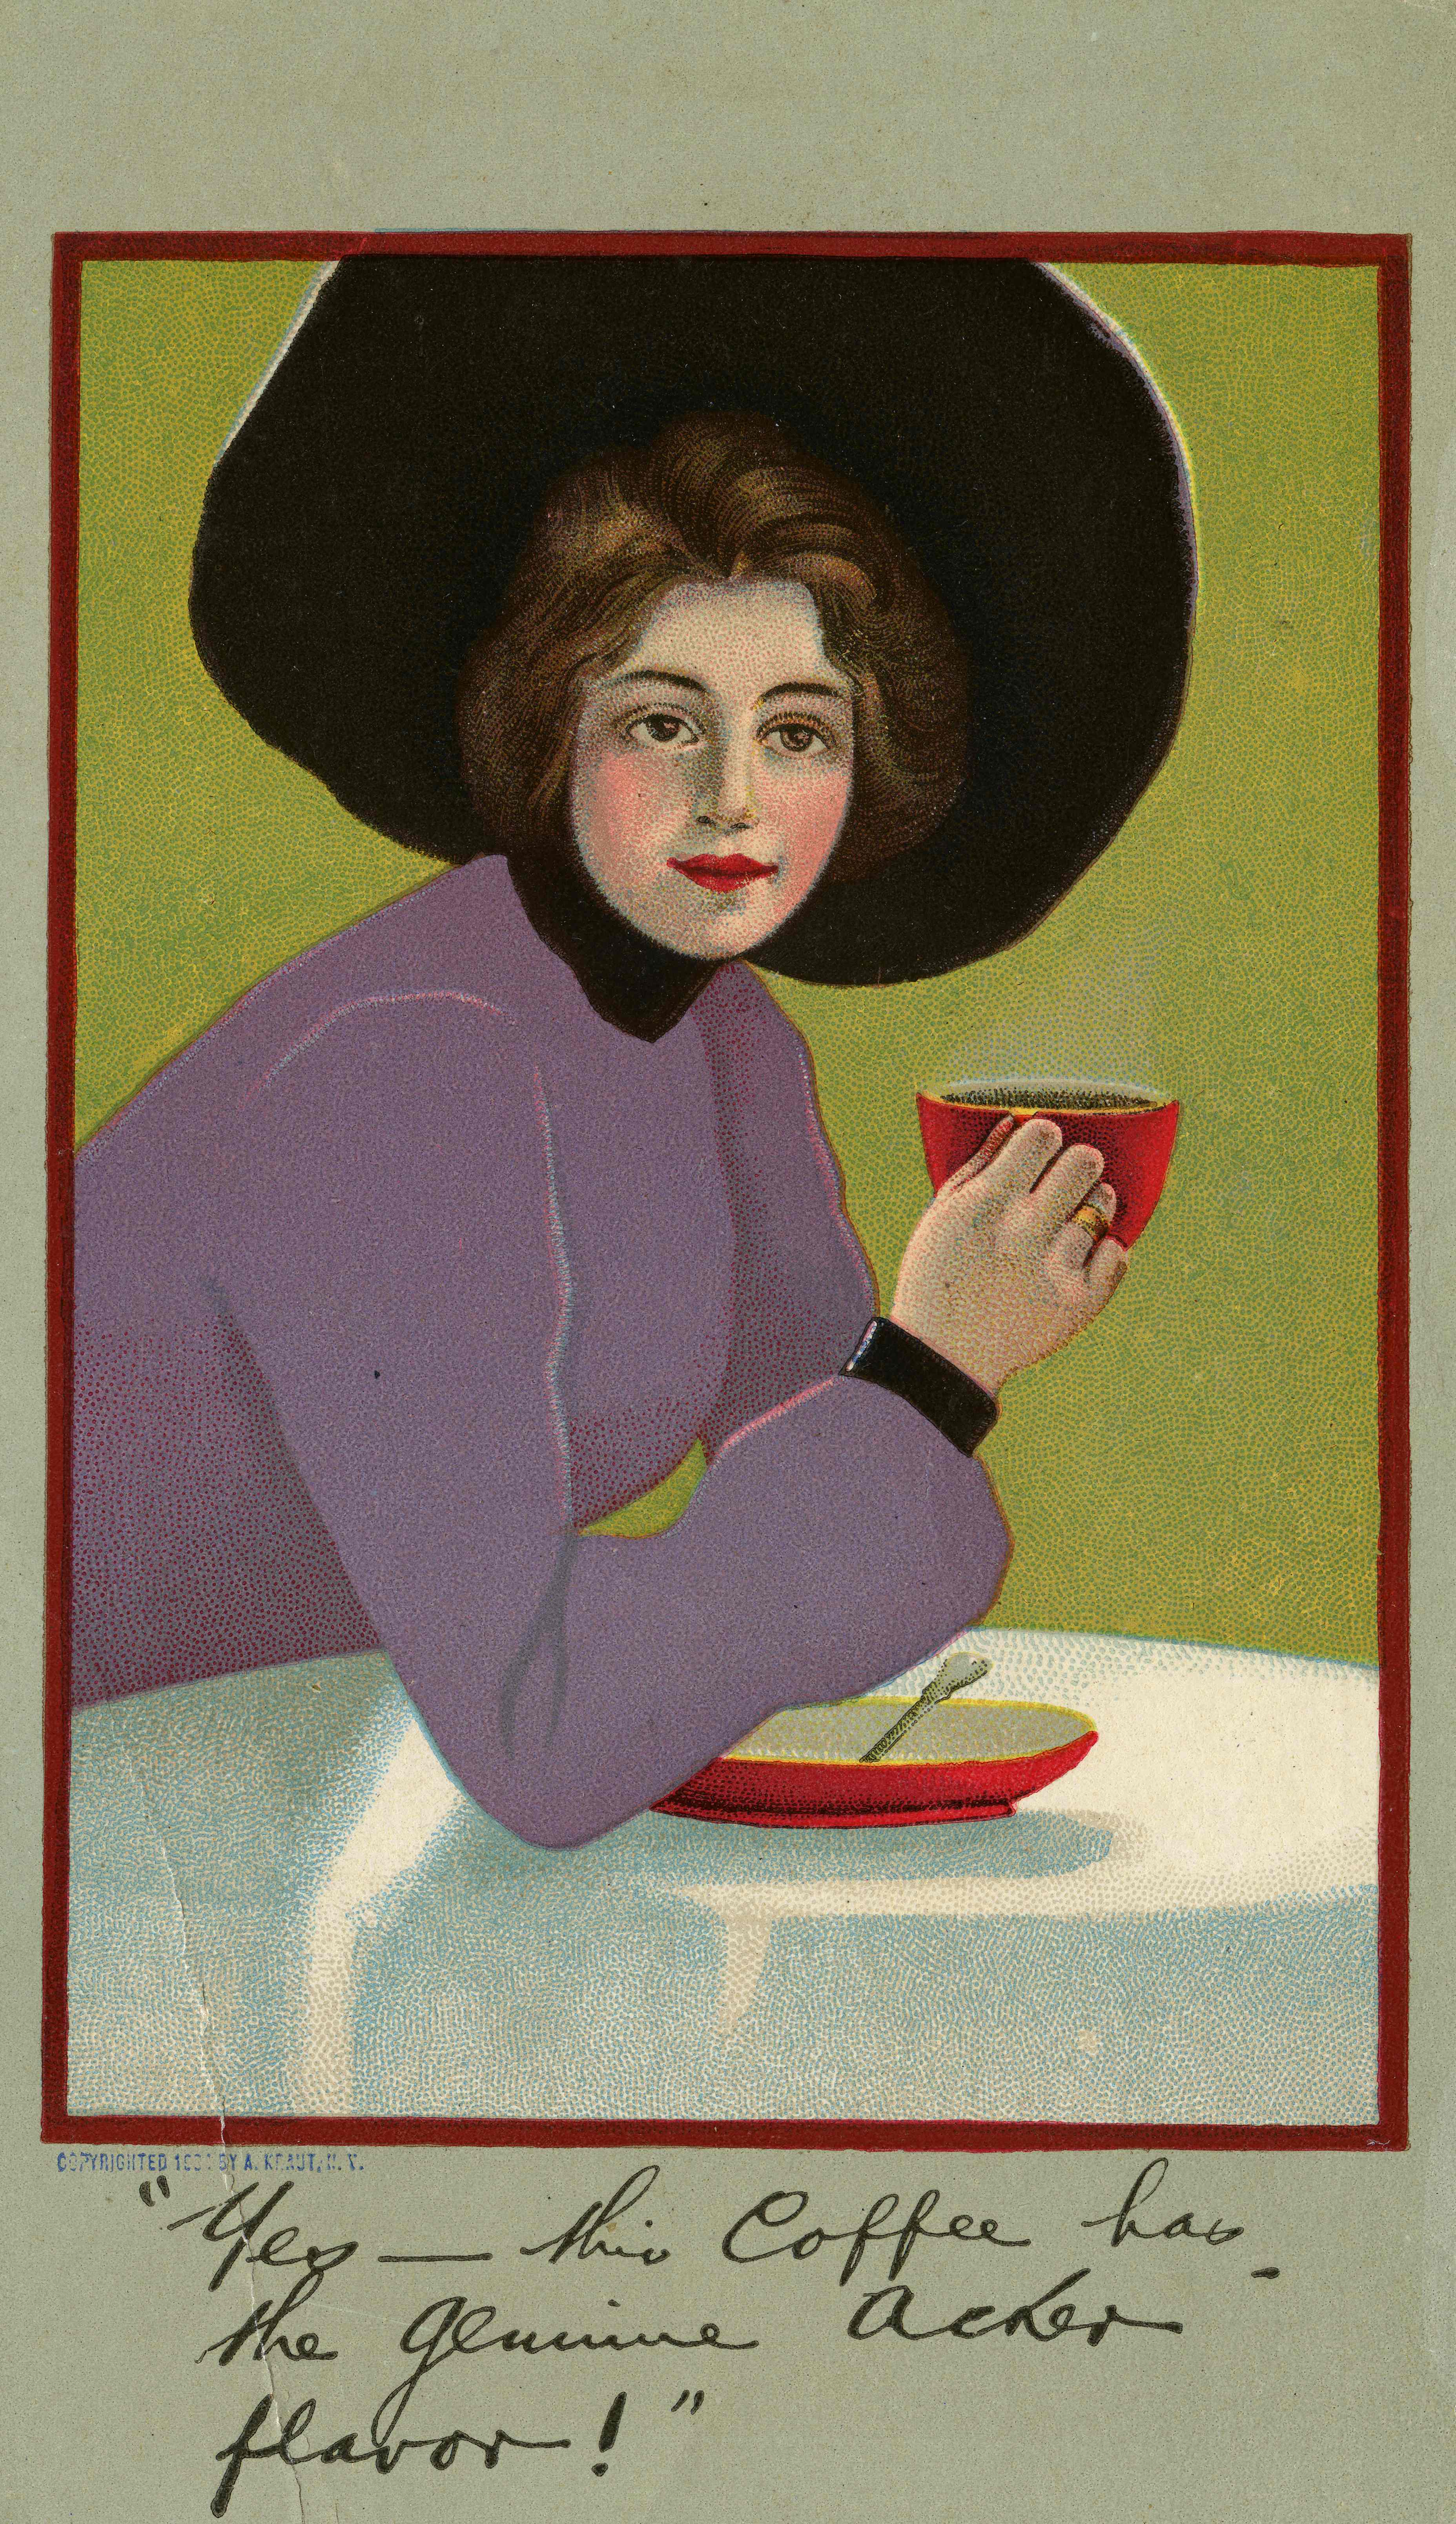 Advertisement featuring an illustration of a woman drinking coffee.